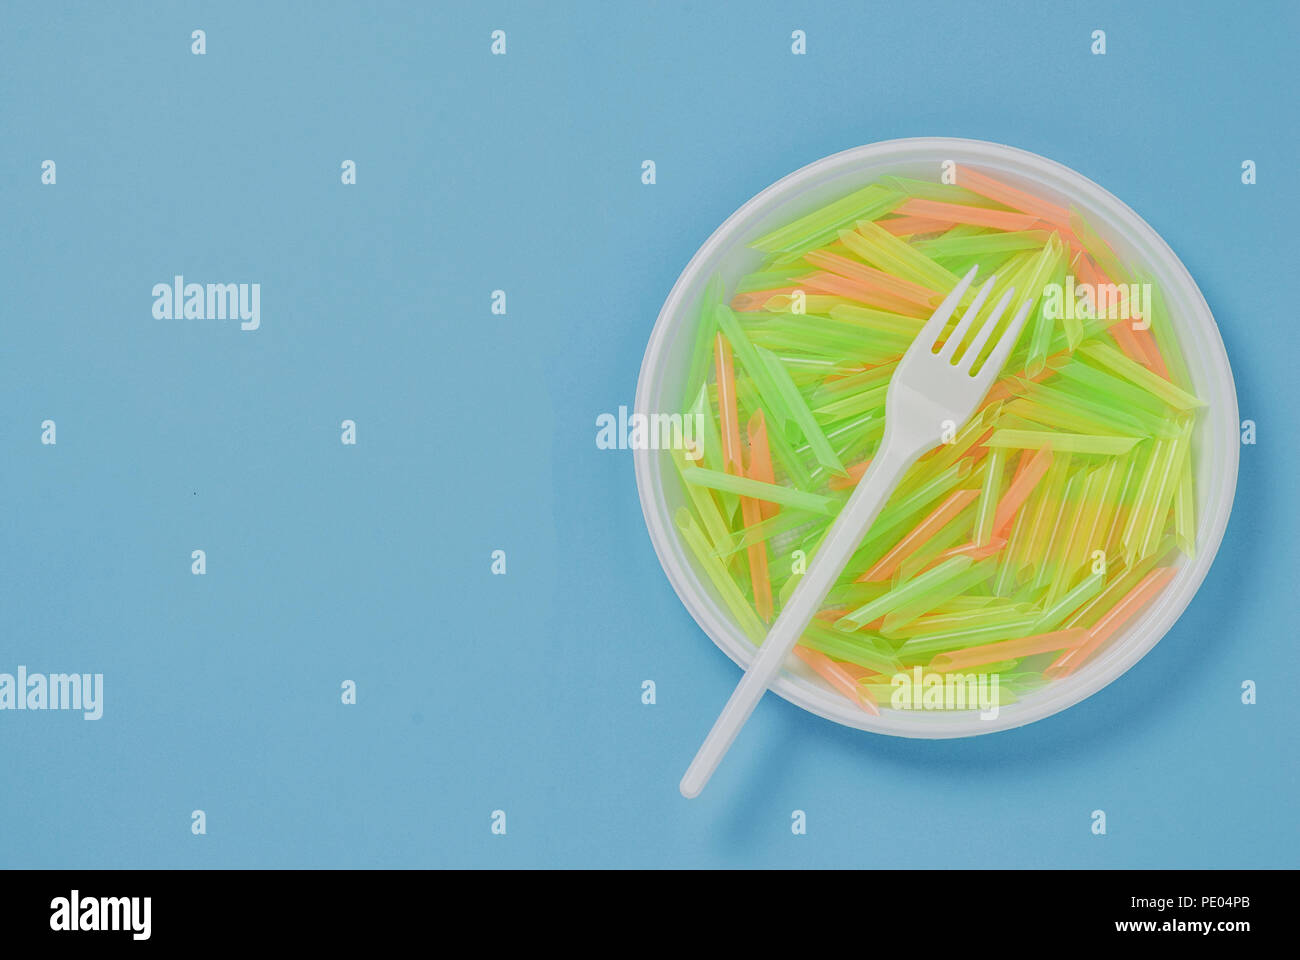 Plate and fork of plastic on a blue background Stock Photo